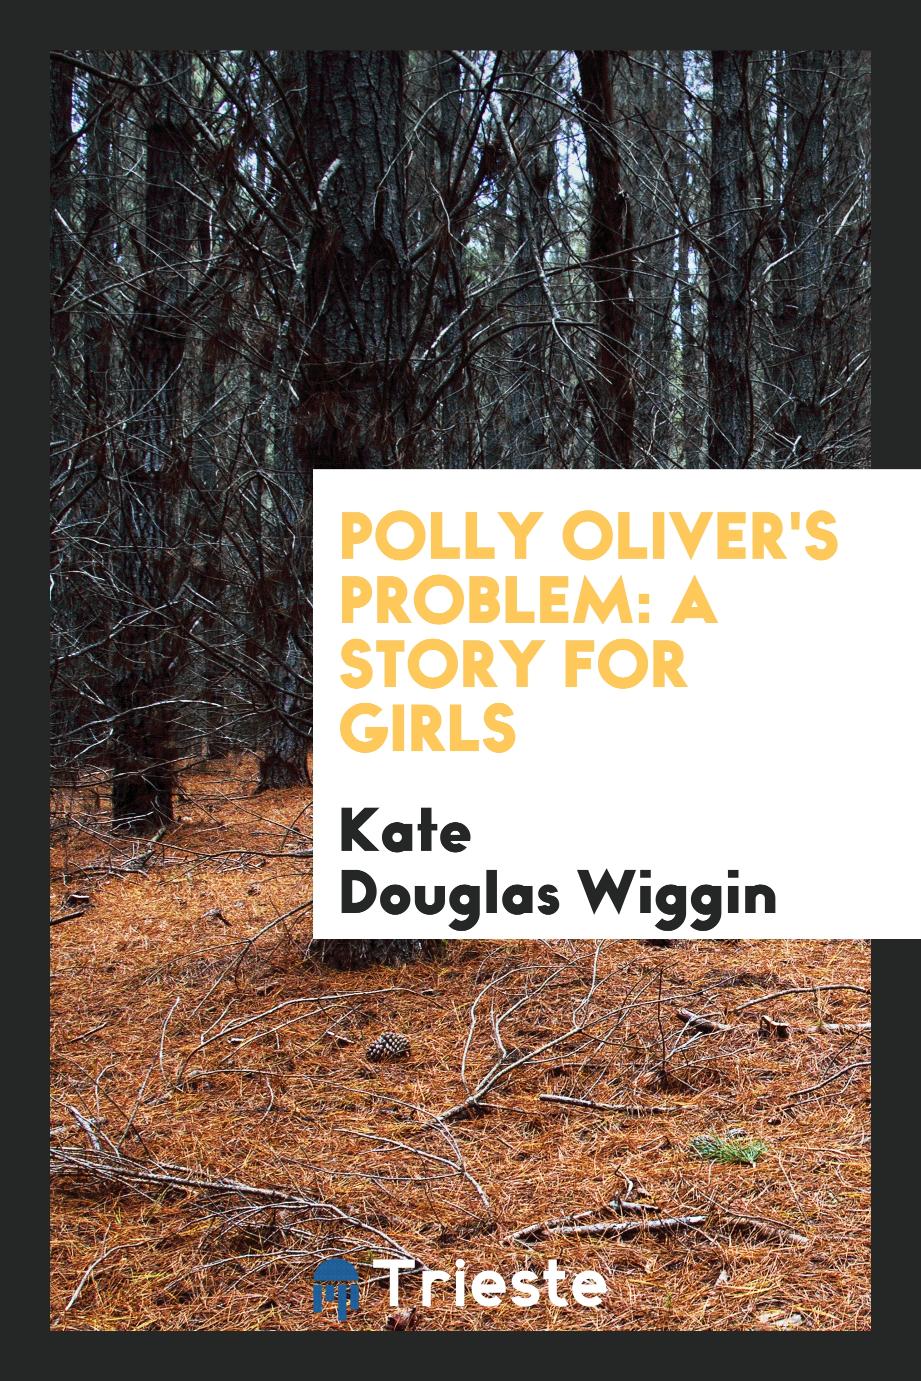 Polly Oliver's problem: a story for girls